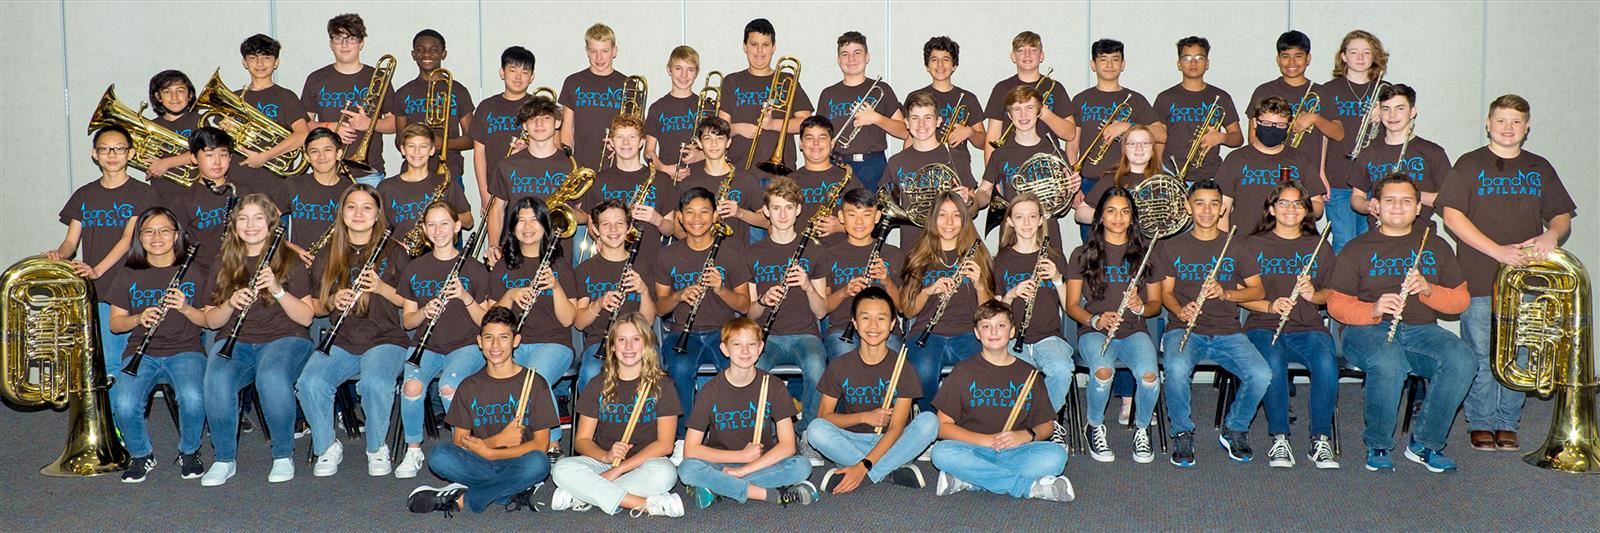 The Spillane symphonic winds was named as a National Winner in the Mark of Excellence/National Wind Band Honors project.